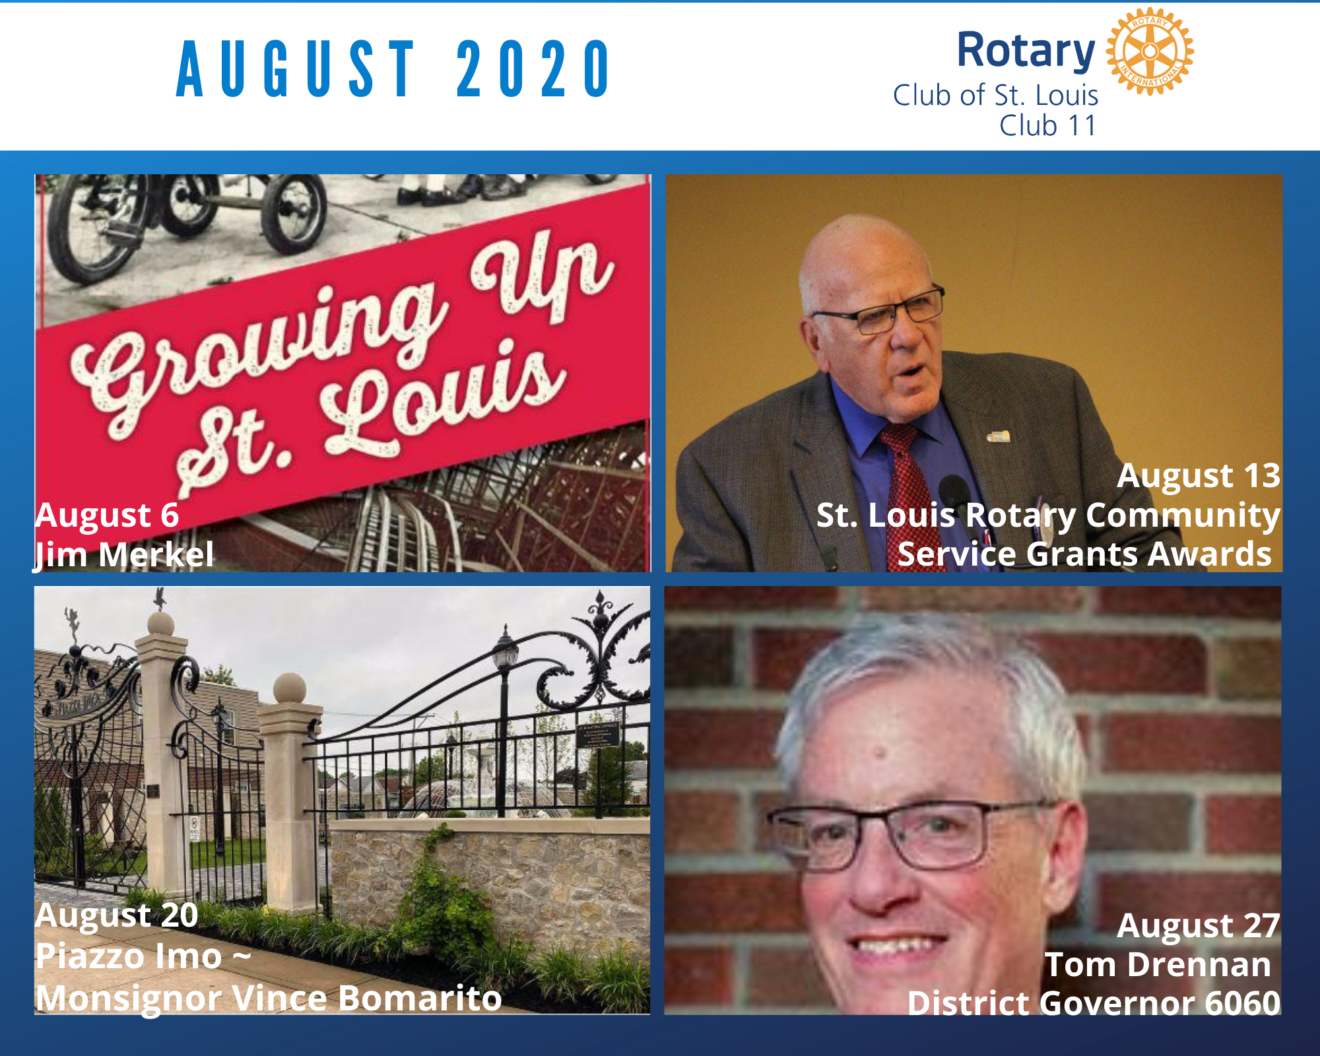 St Louis Rotary August 2020 Storyboard